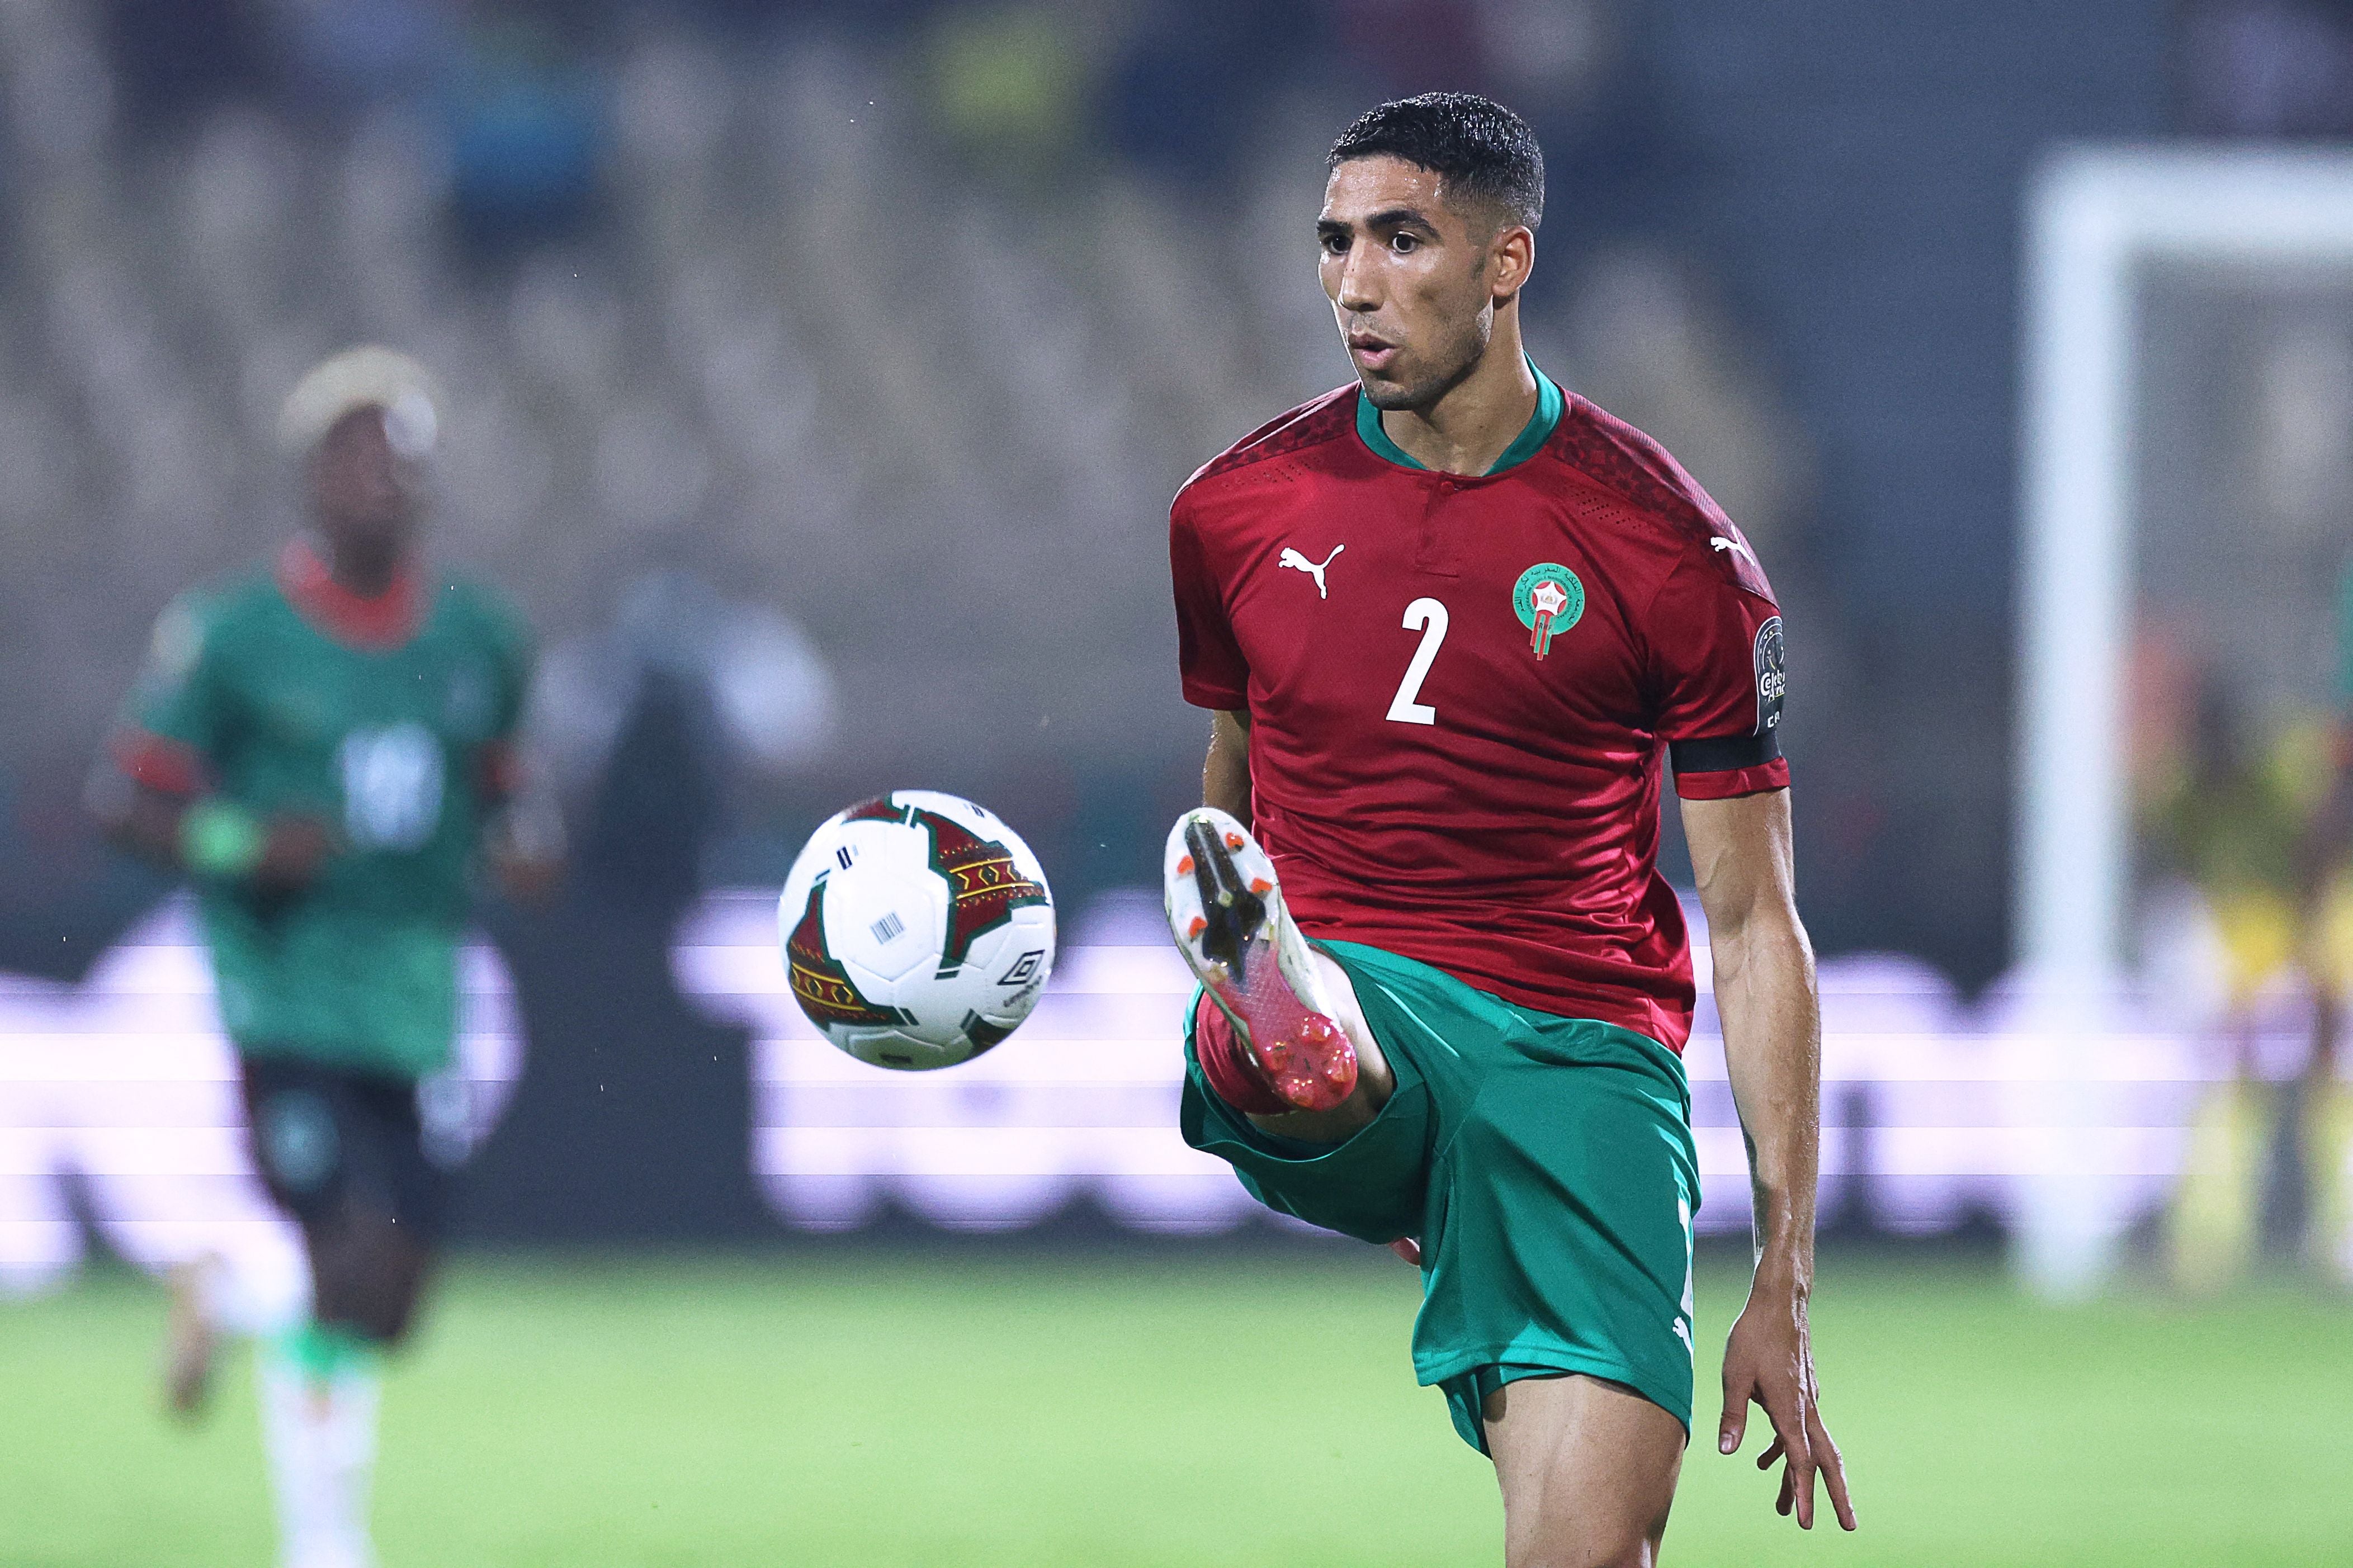 Achraf Hakimi’s career has already seen him accomplish a lot despite his young age